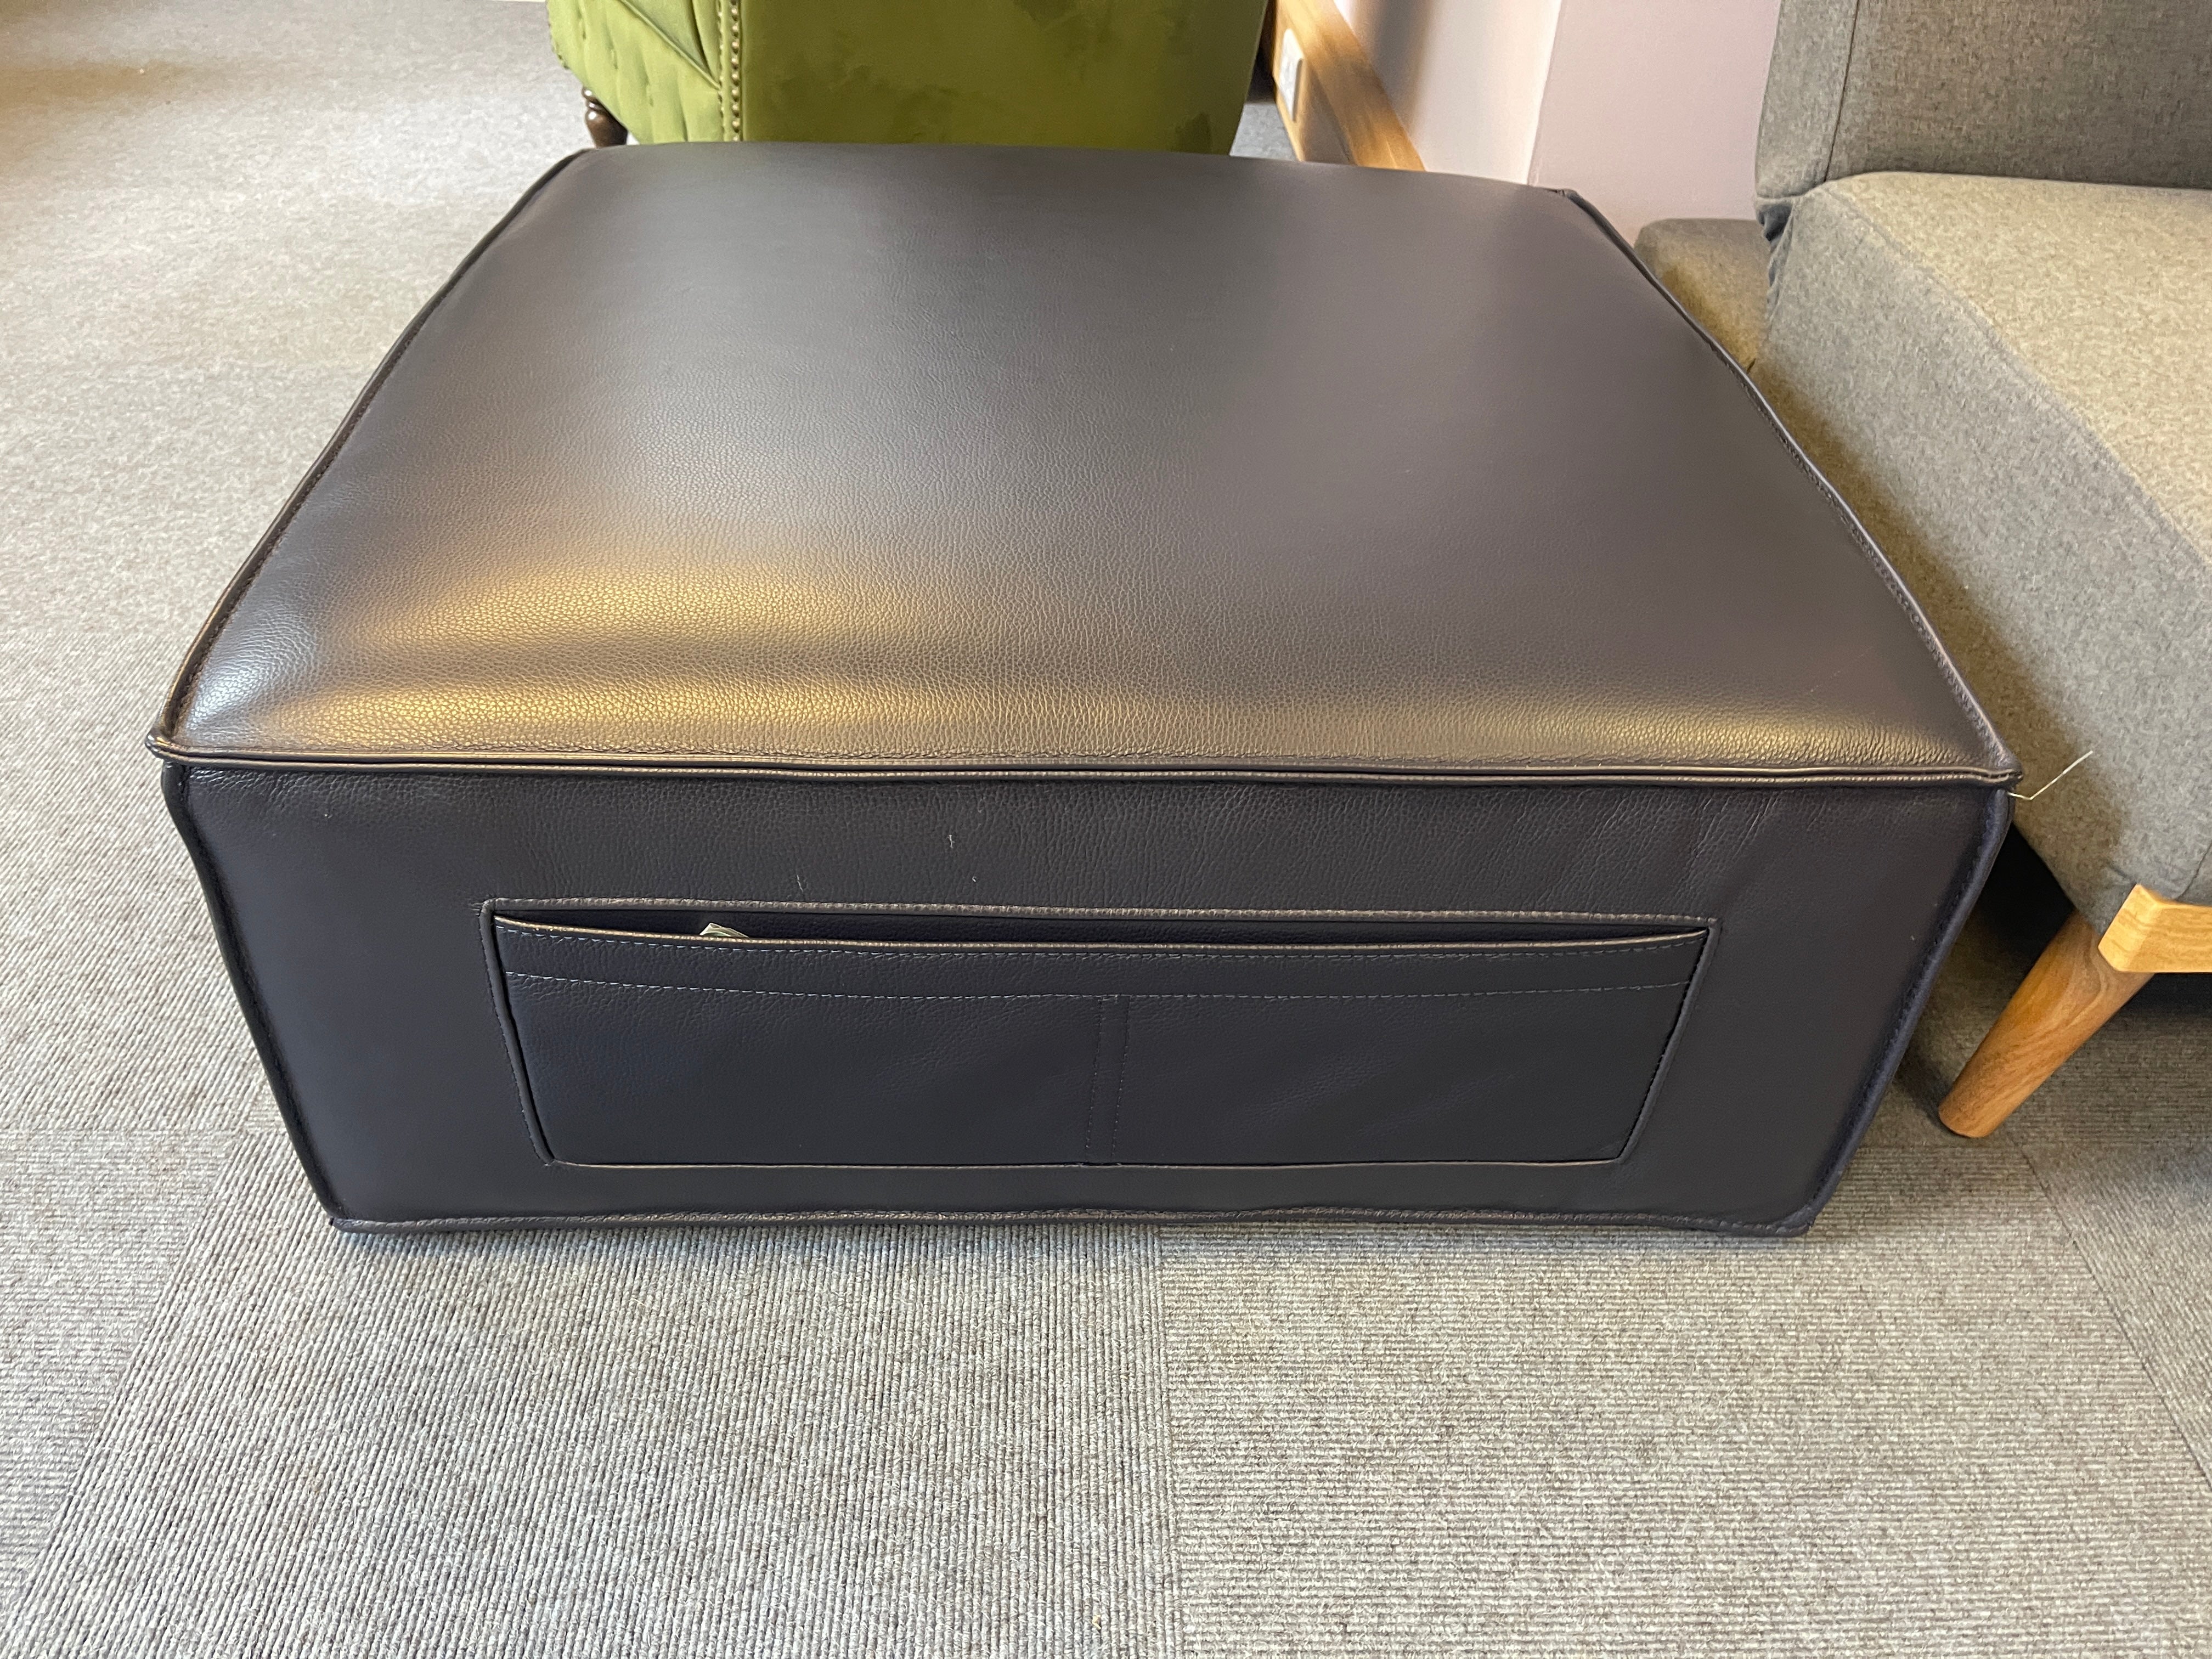 WHITE LABEL low square shape footstool with side storage in navy blue leather